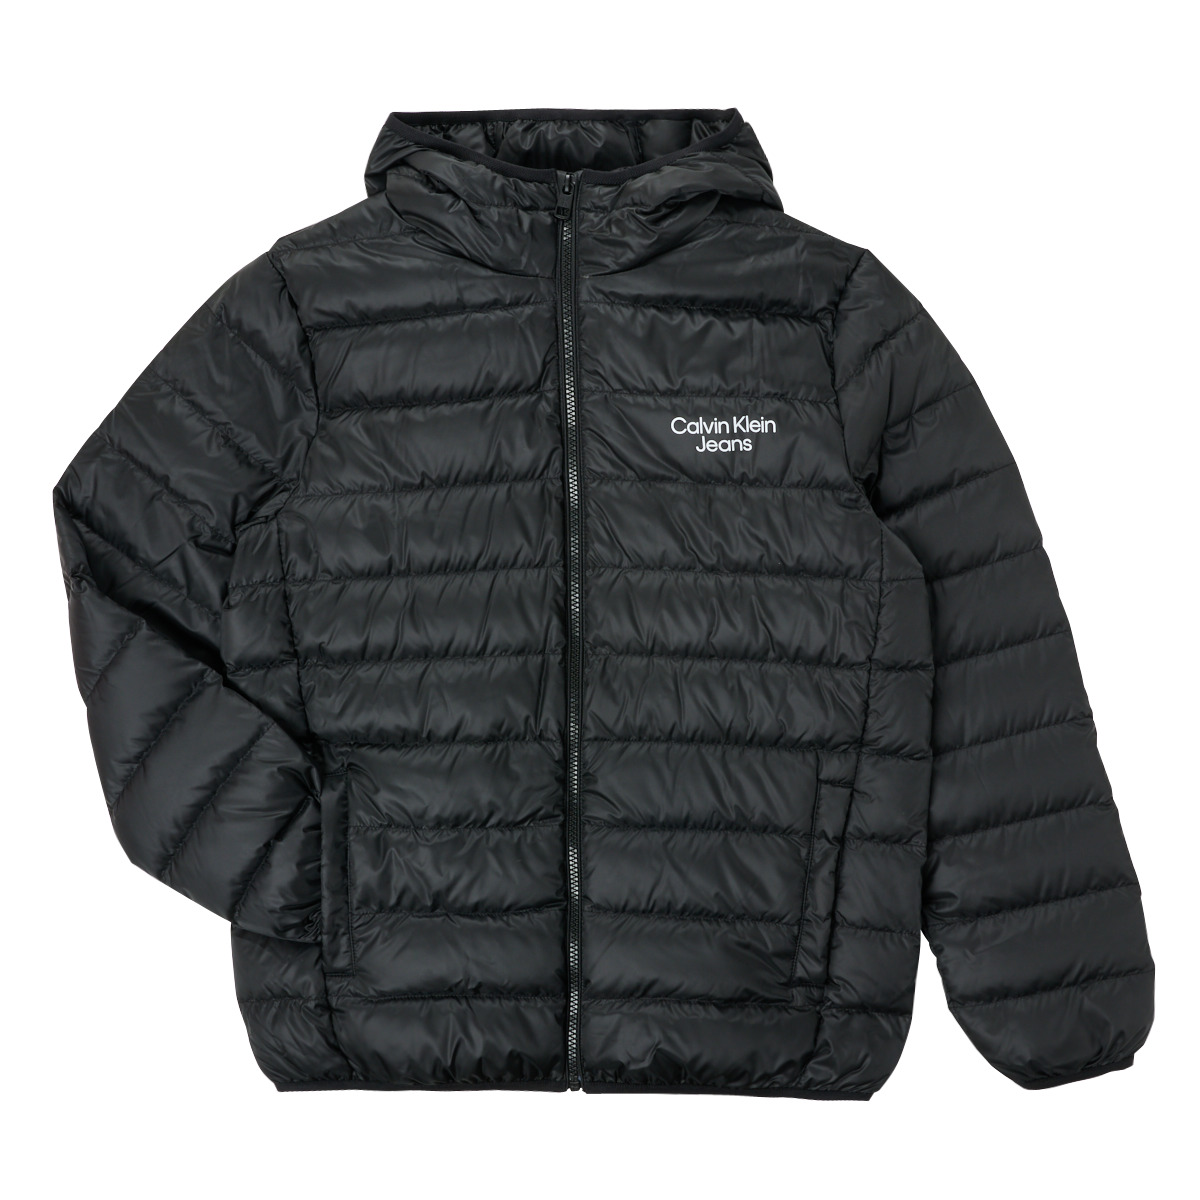 Calvin Klein | LW Duffel - Free coats Child Clothing - delivery Black Jeans ! Spartoo JACKET LOGO DOWN NET